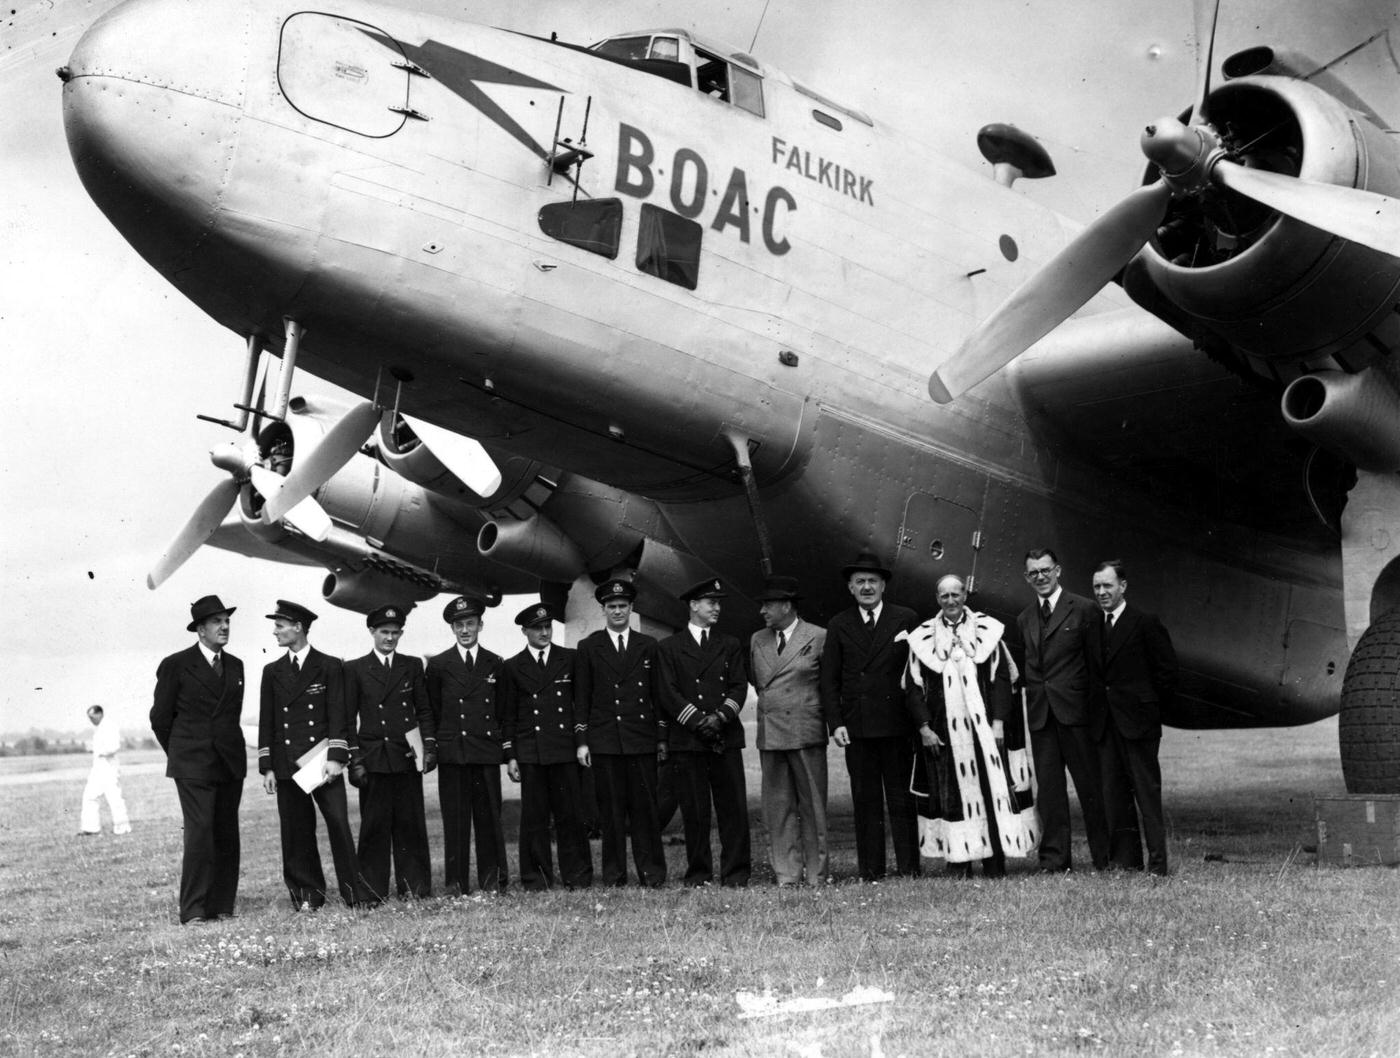 The first of the Handley Page 'Halton' aircraft, the civil transport version of the Halifax bomber, with its interior changed for passenger accommodation, is christened the BOAC 'Falkirk' in 1946.